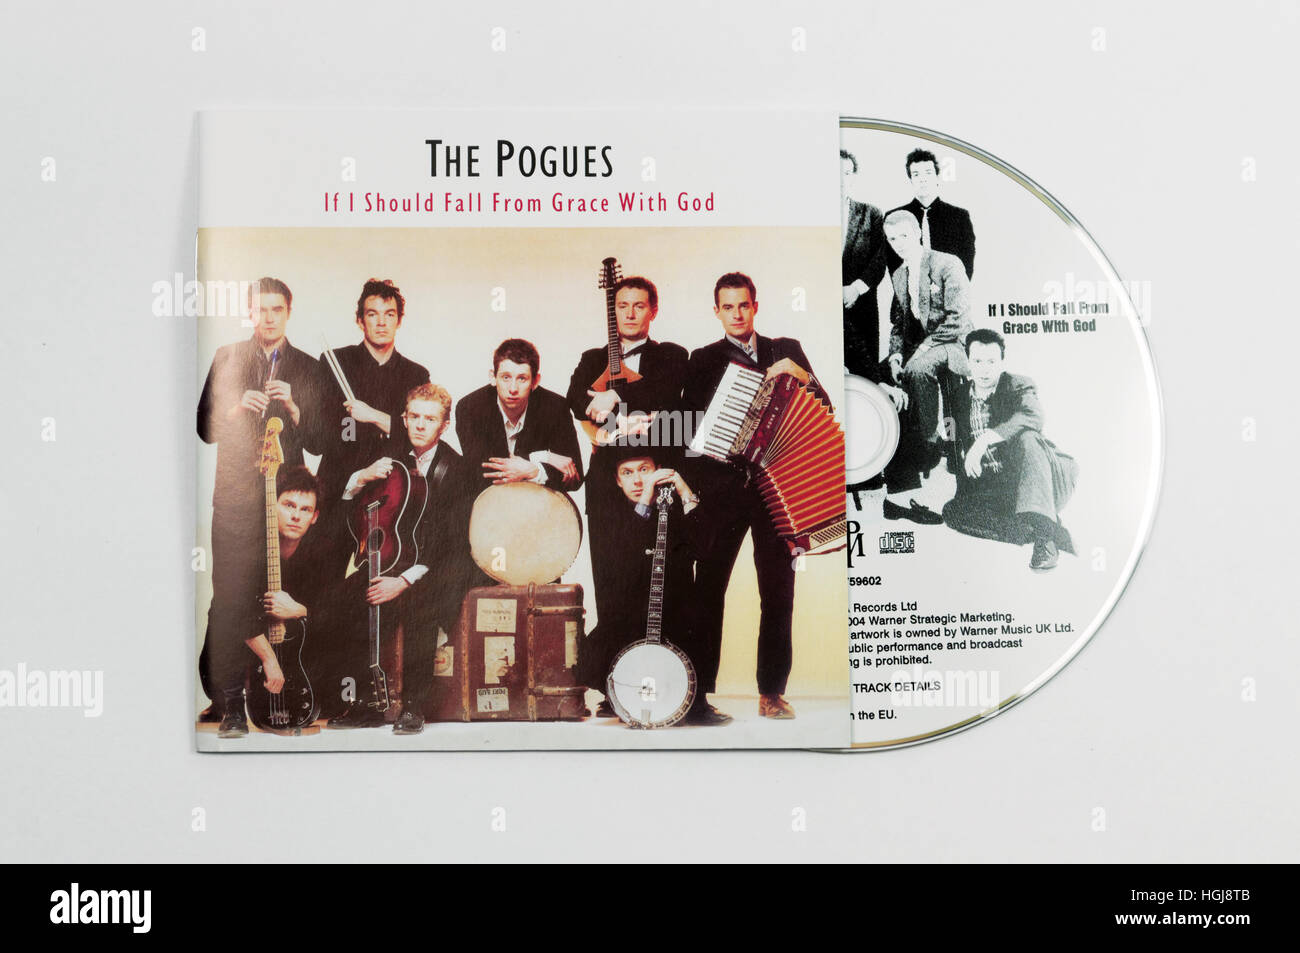 The Pogues 'If I should fall from grace with God' Album. Stock Photo